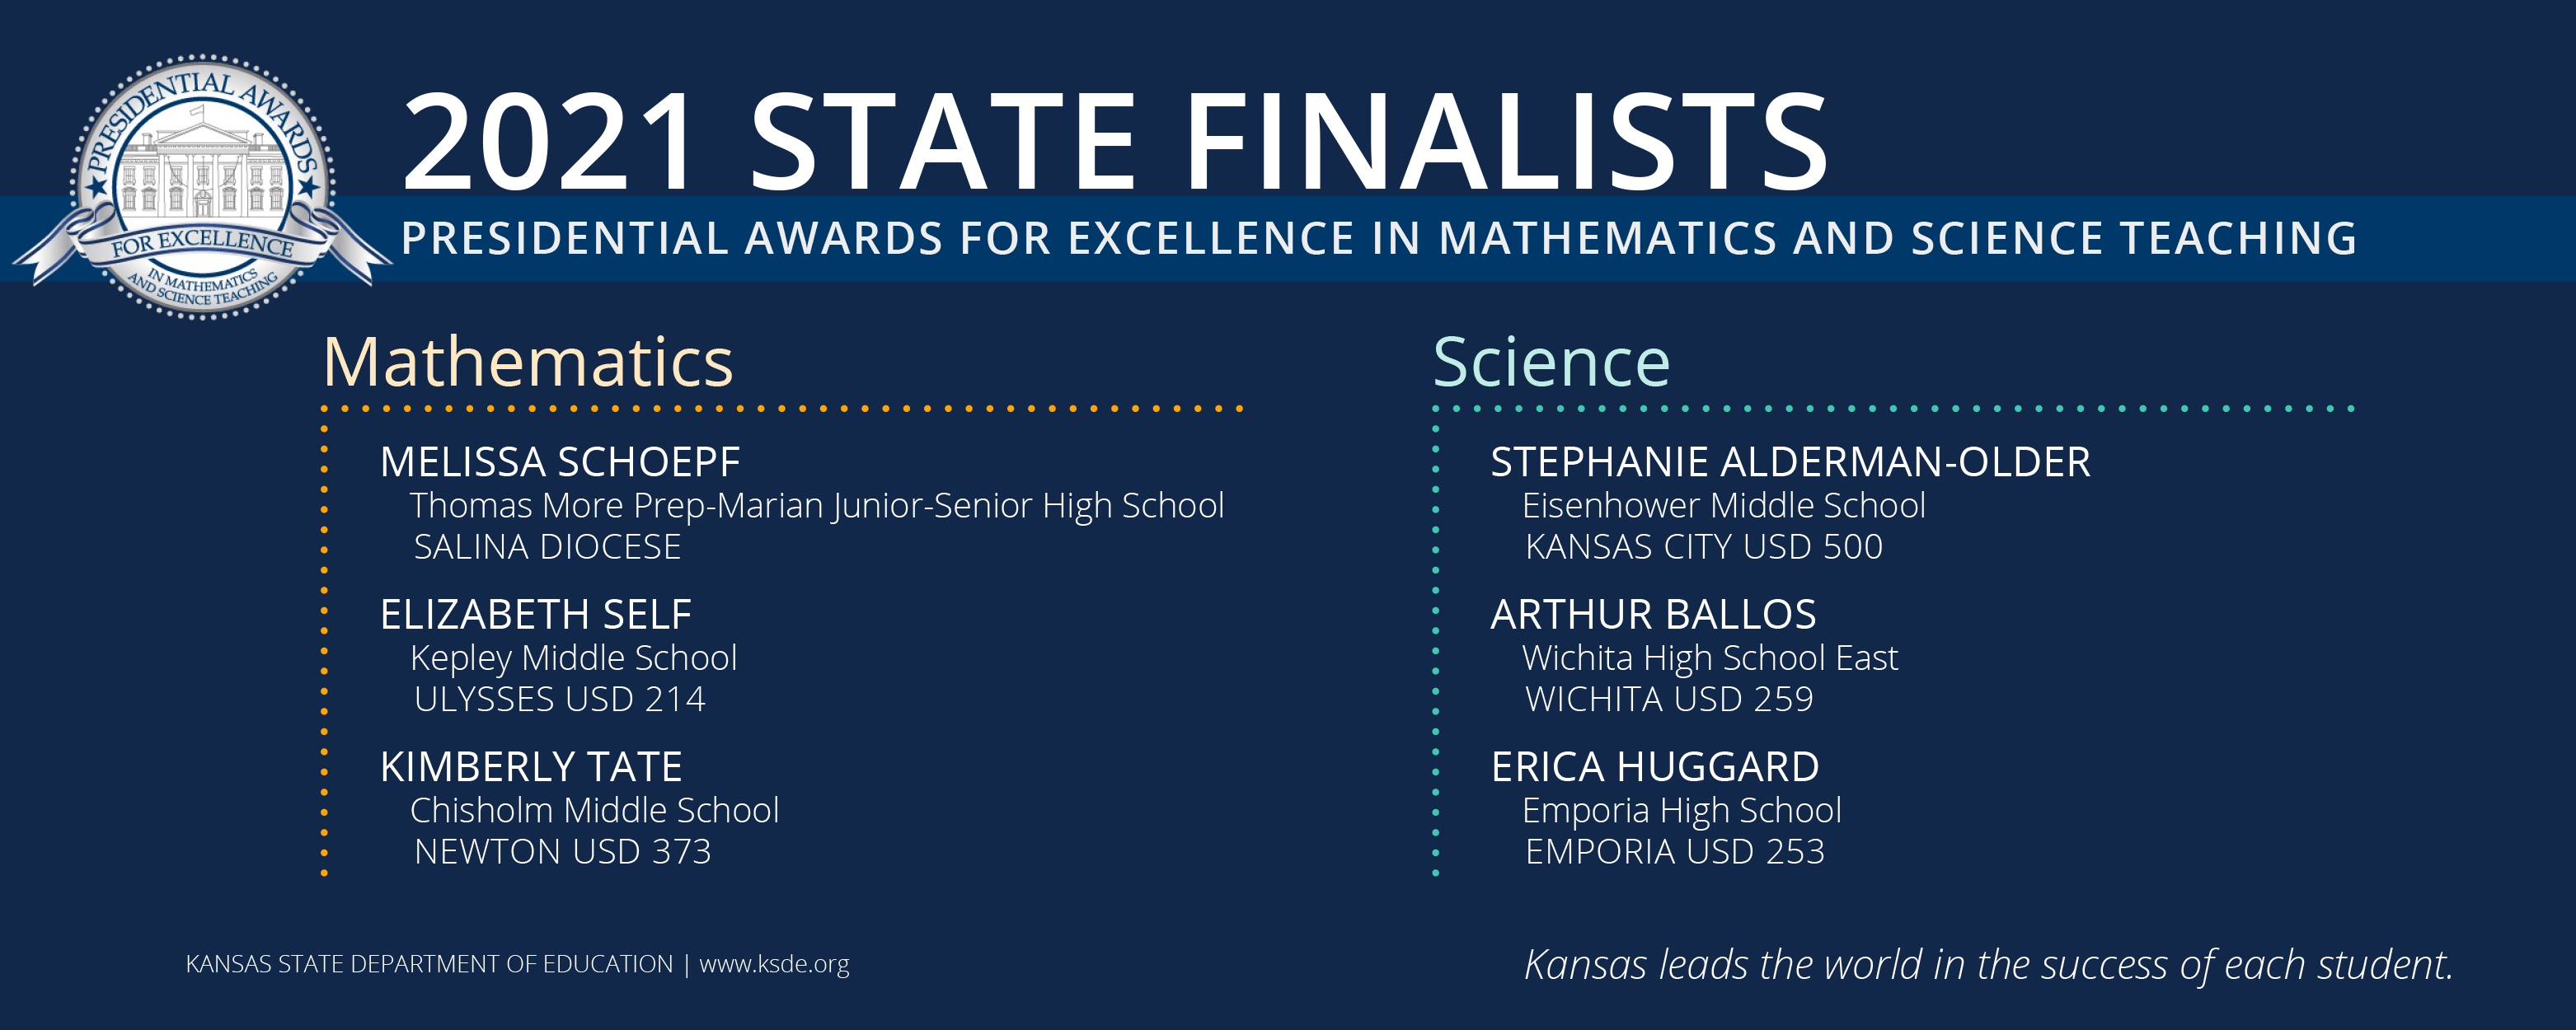 Congratulations to the 2021 Kansas PAEMST Finalists